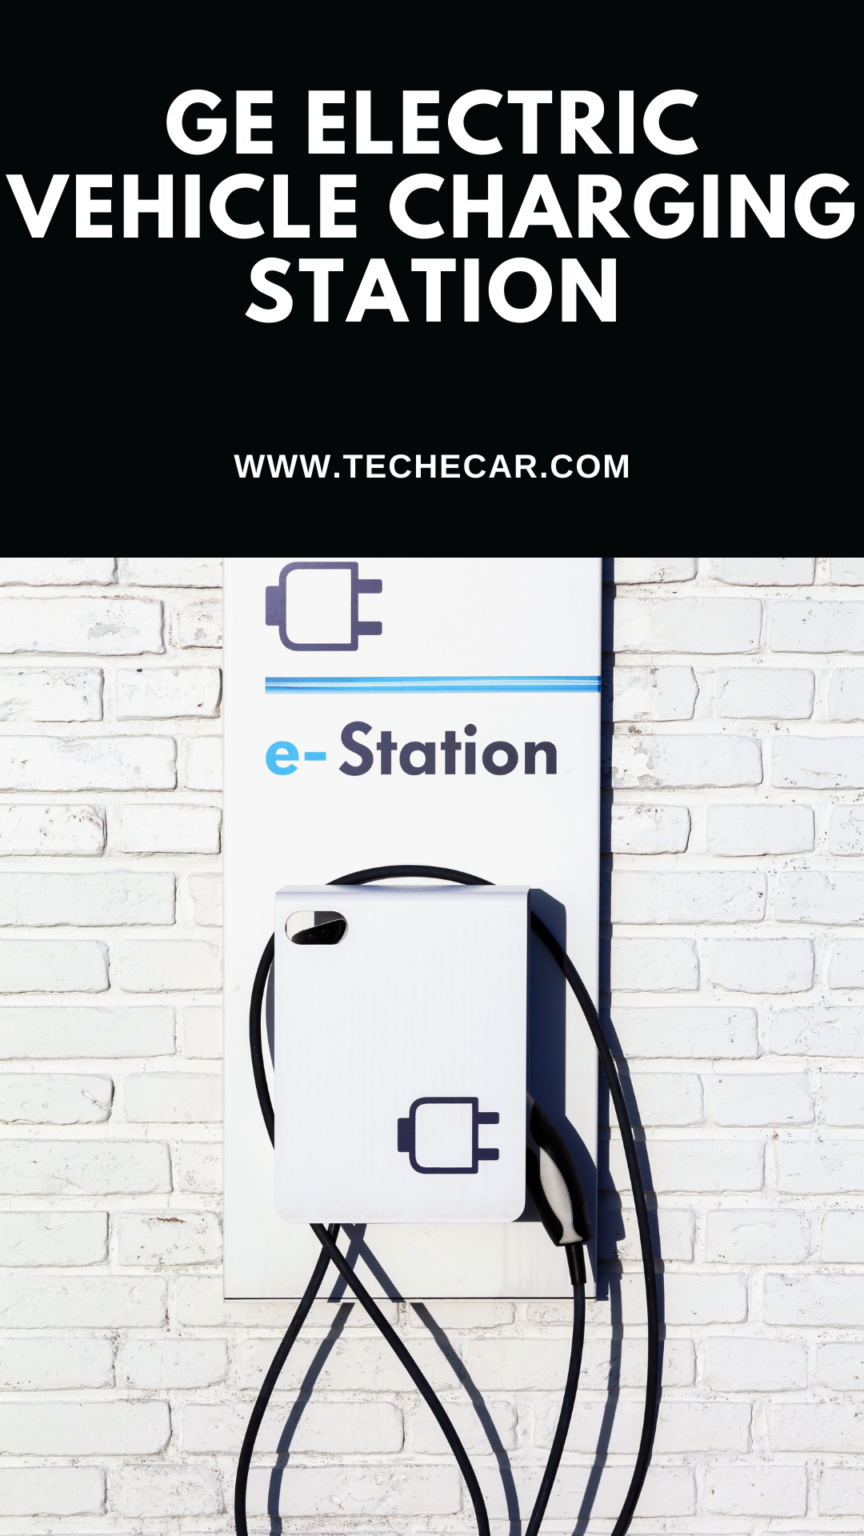 GE Electric Vehicle Charging Station » TECHECAR